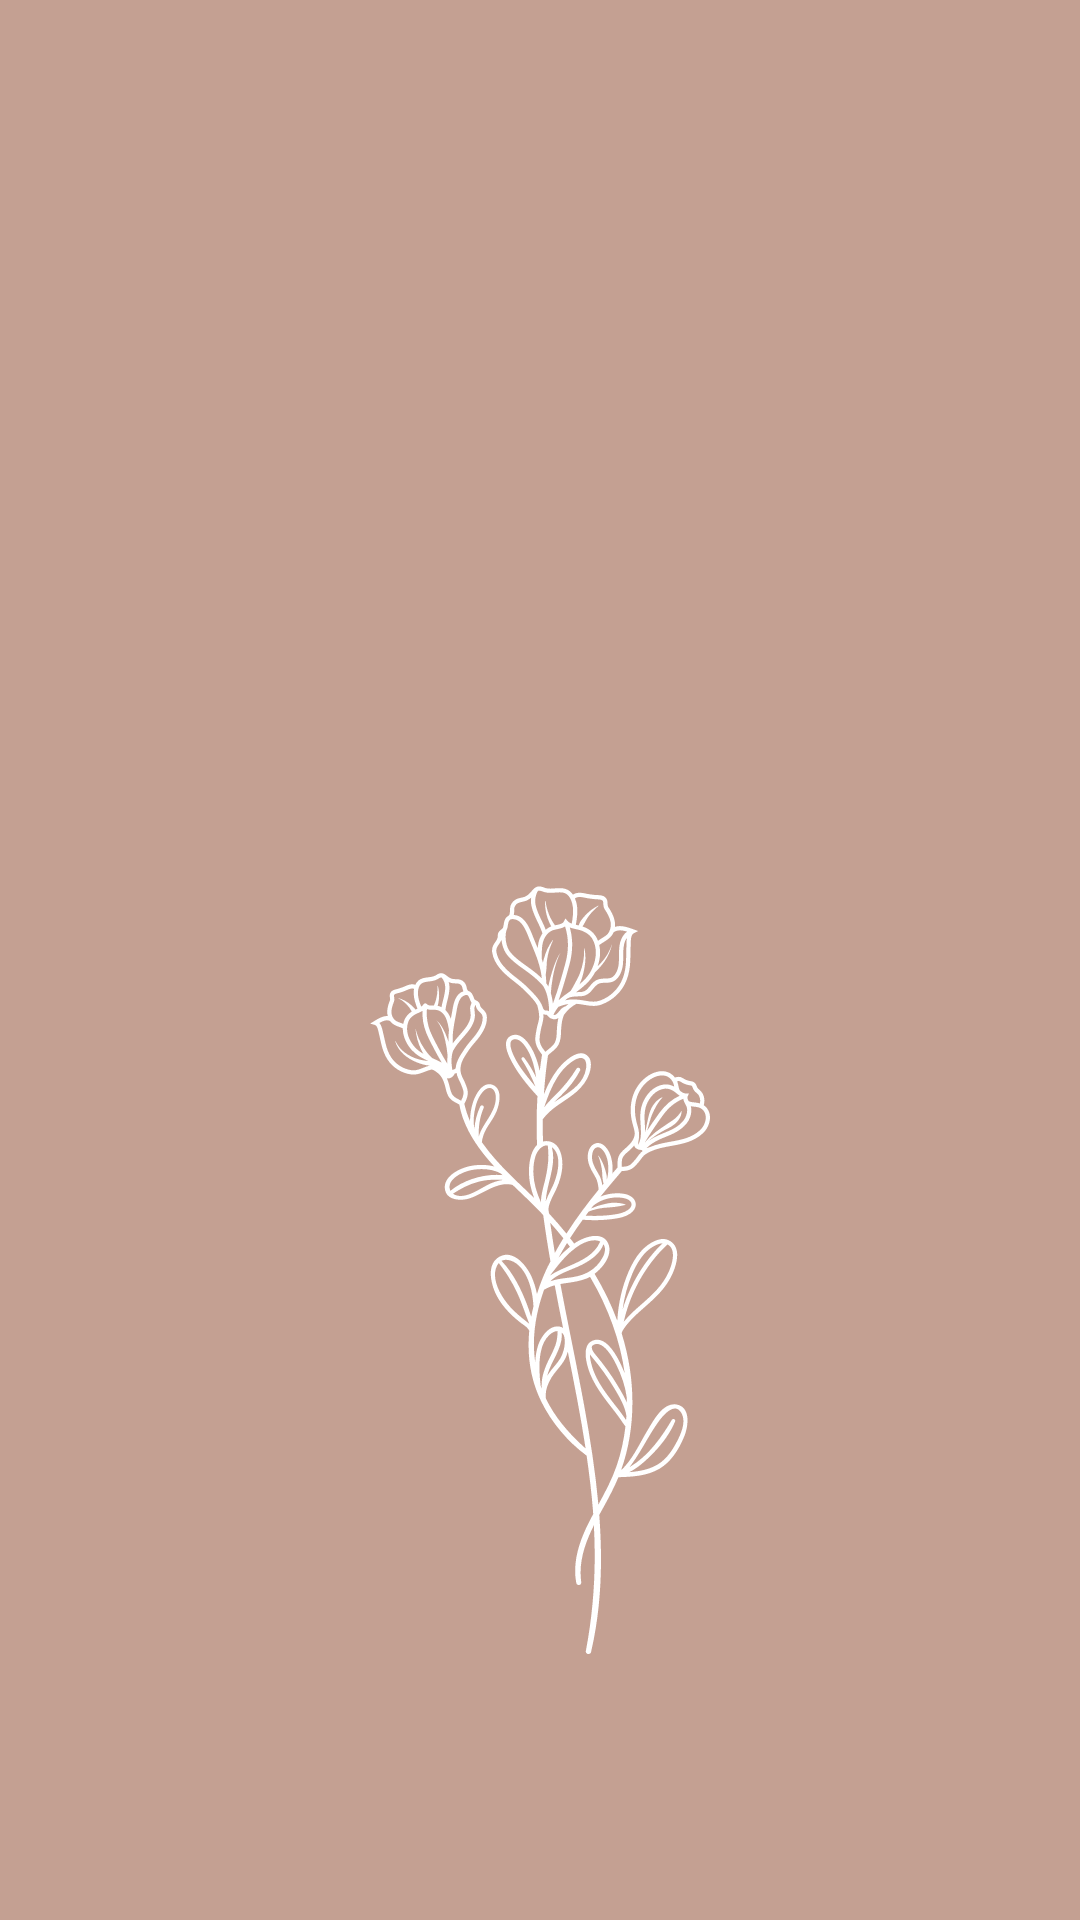 A simple floral design on brown background - Minimalist, phone